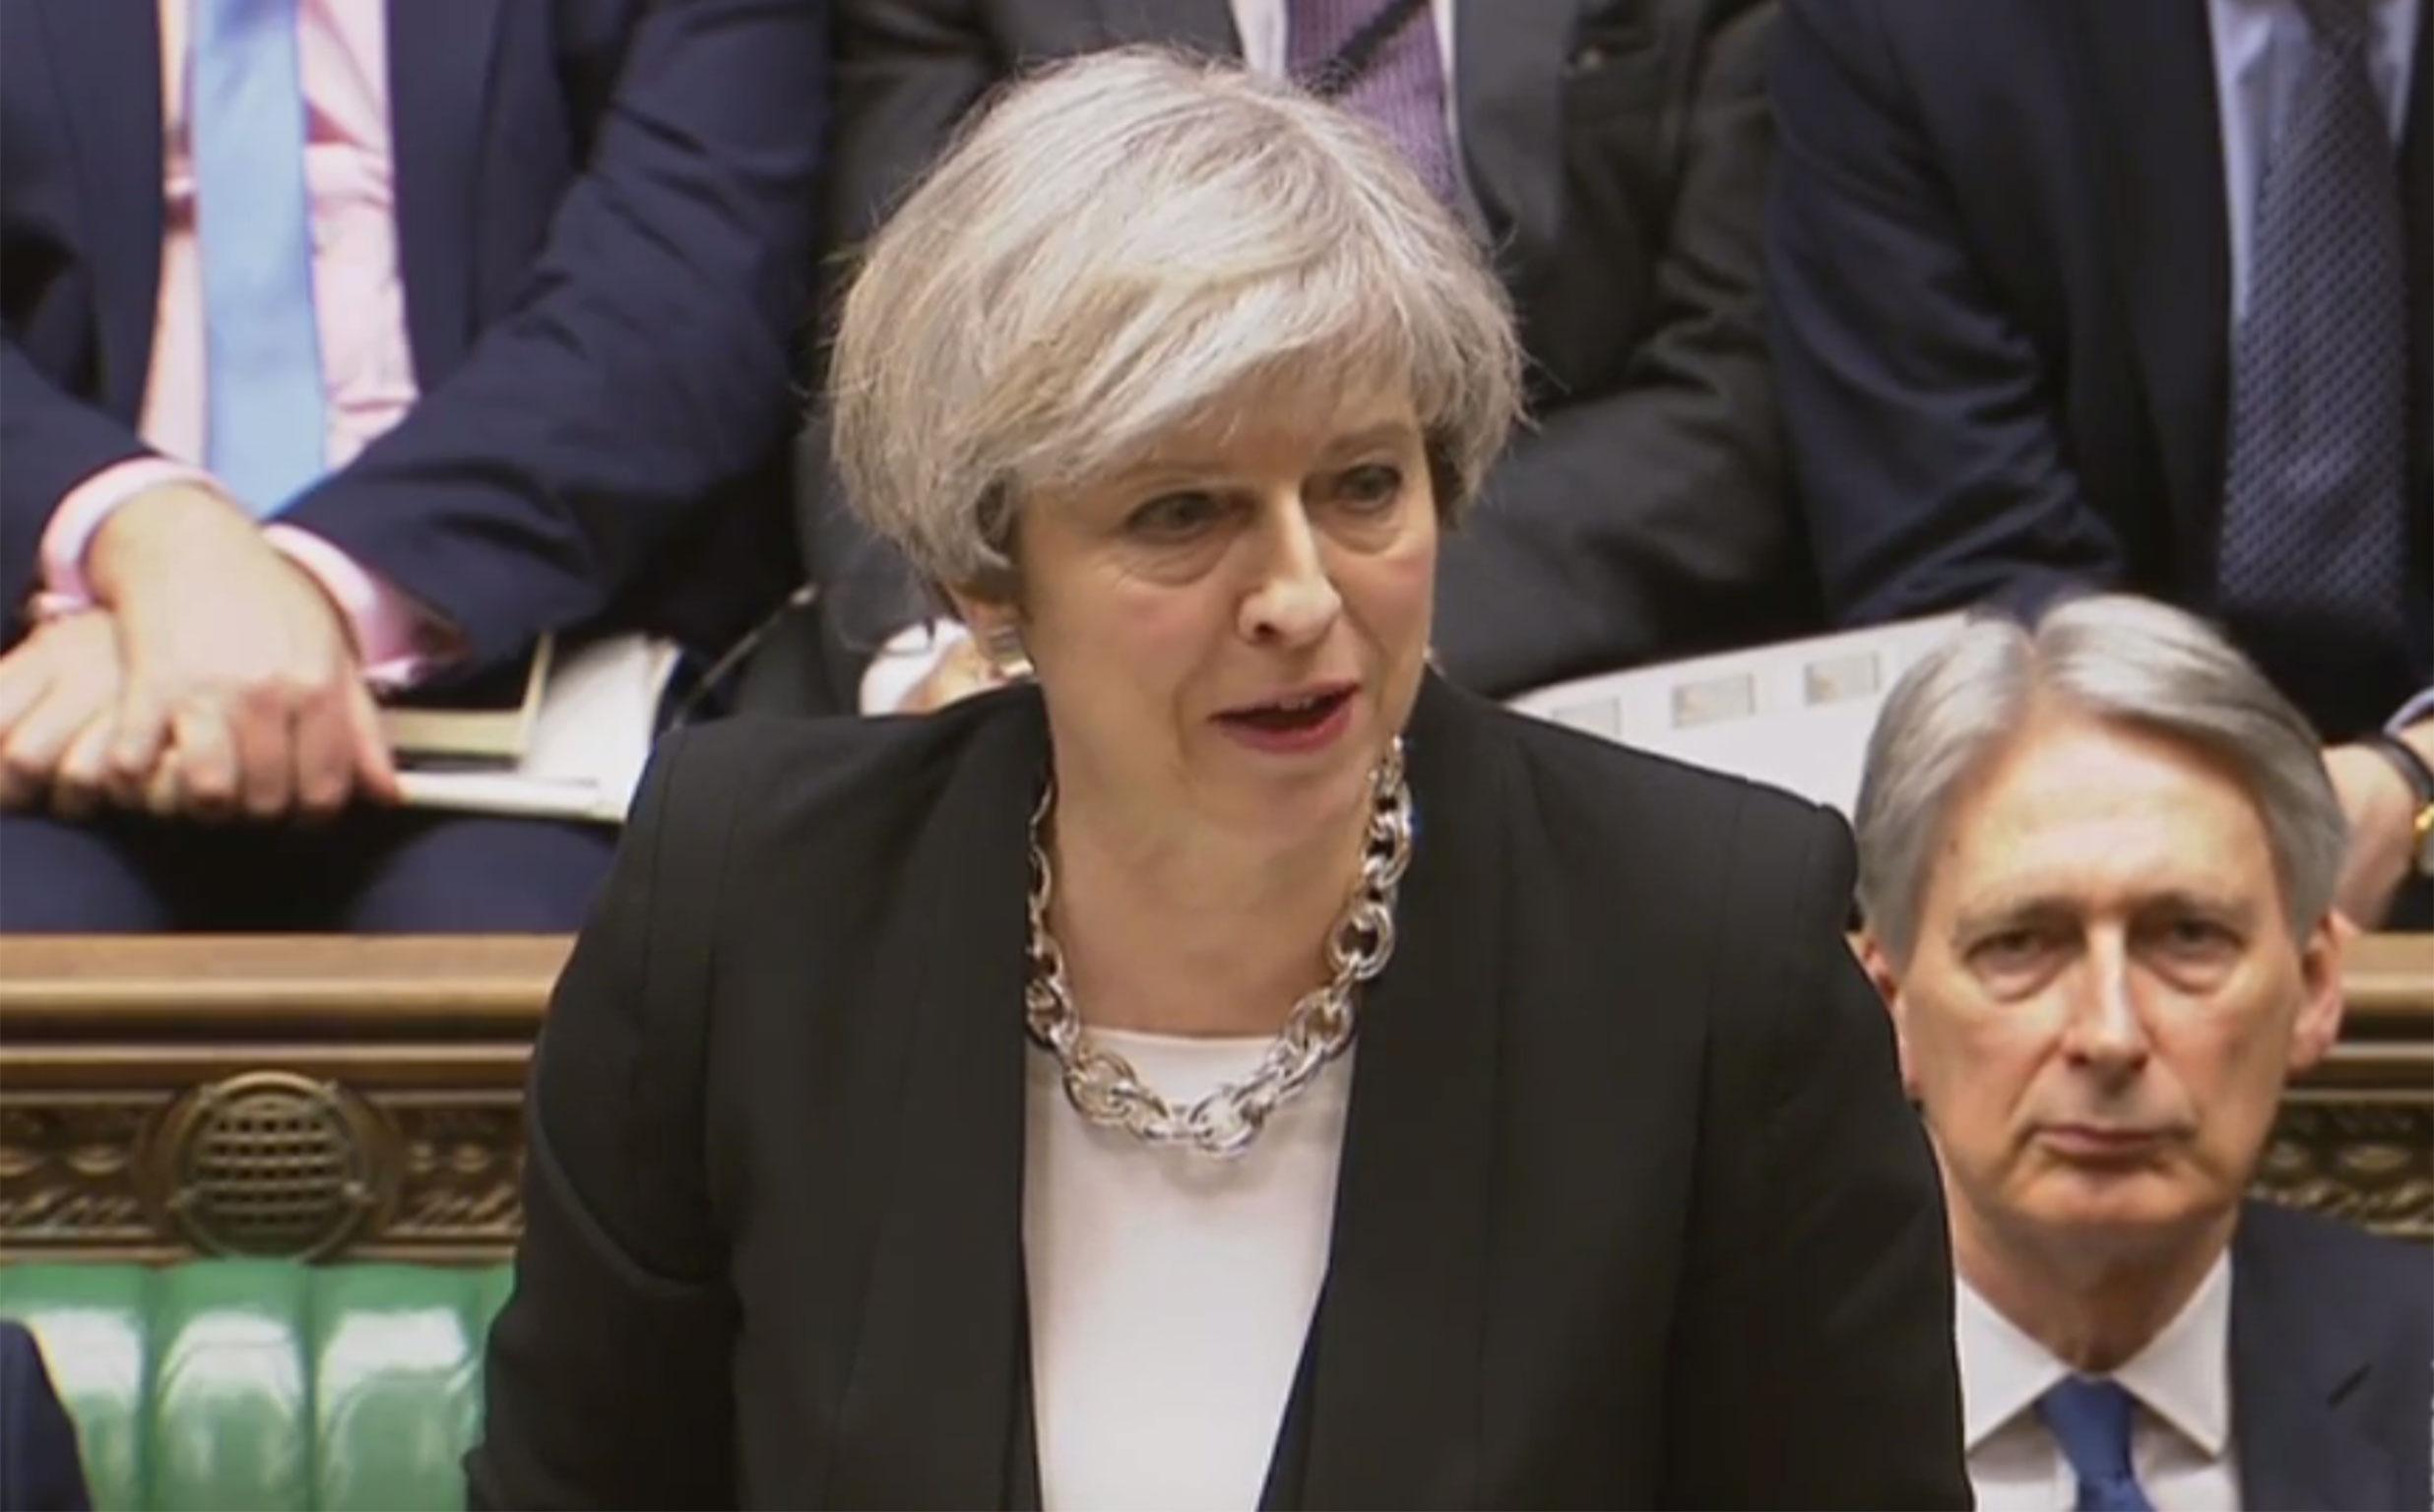 ‘While the public should remain utterly vigilant, they should not – and will not – be cowed by this threat,’ Ms May told MPs